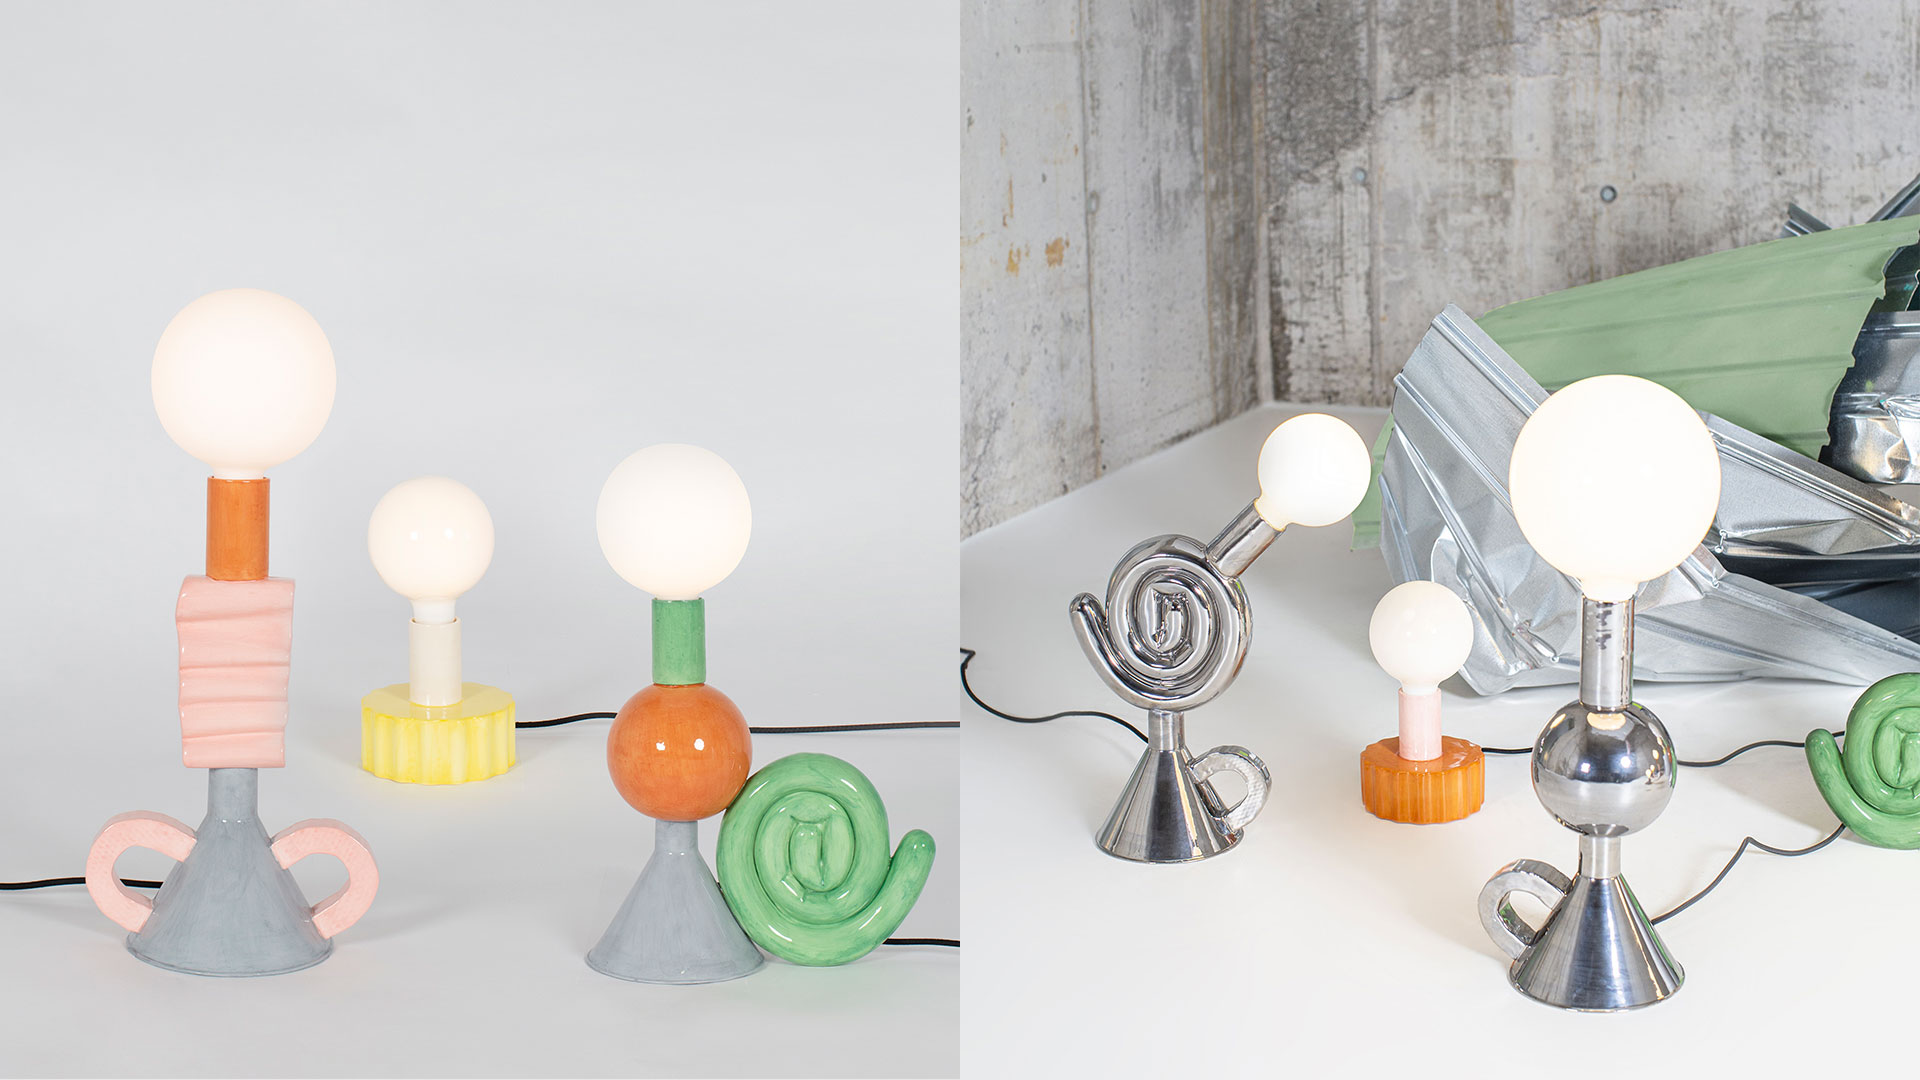 Natascha Madeiski salvages household objects to build ‘Flaming Stars’ lamps